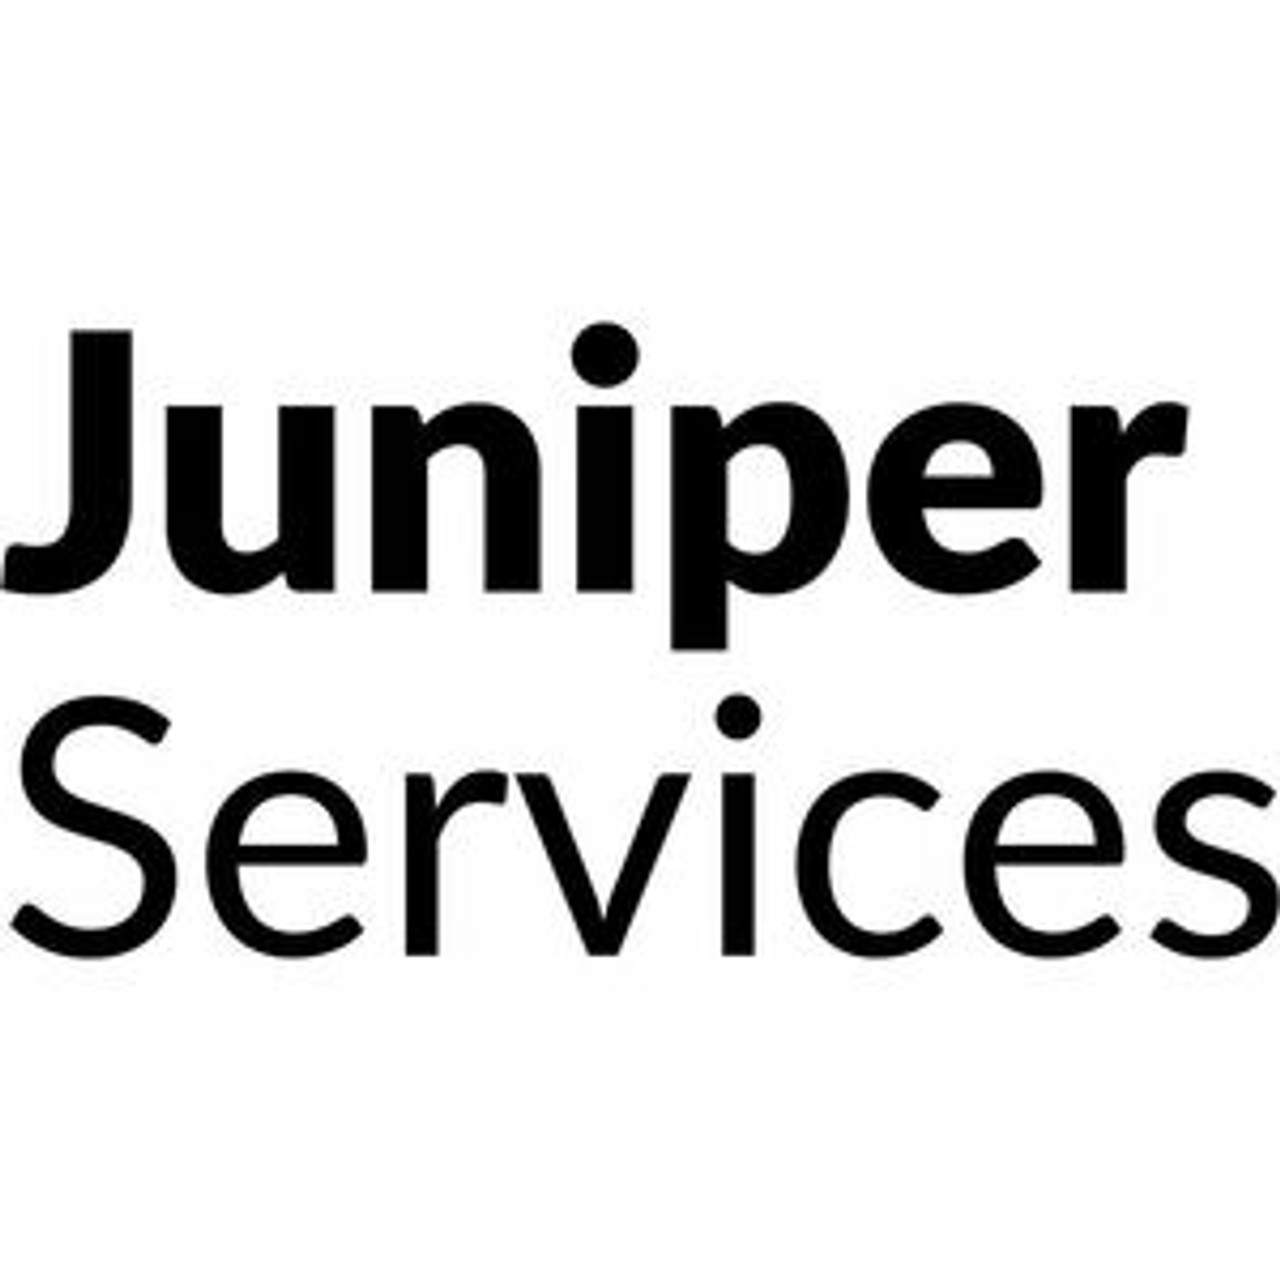 Juniper Session Smart Networking Software Premium 2 Session Smart Router - 1 Instance, 1Gbps maximum throughput - 1 Year - S-SSN-P2-1G-1-GM